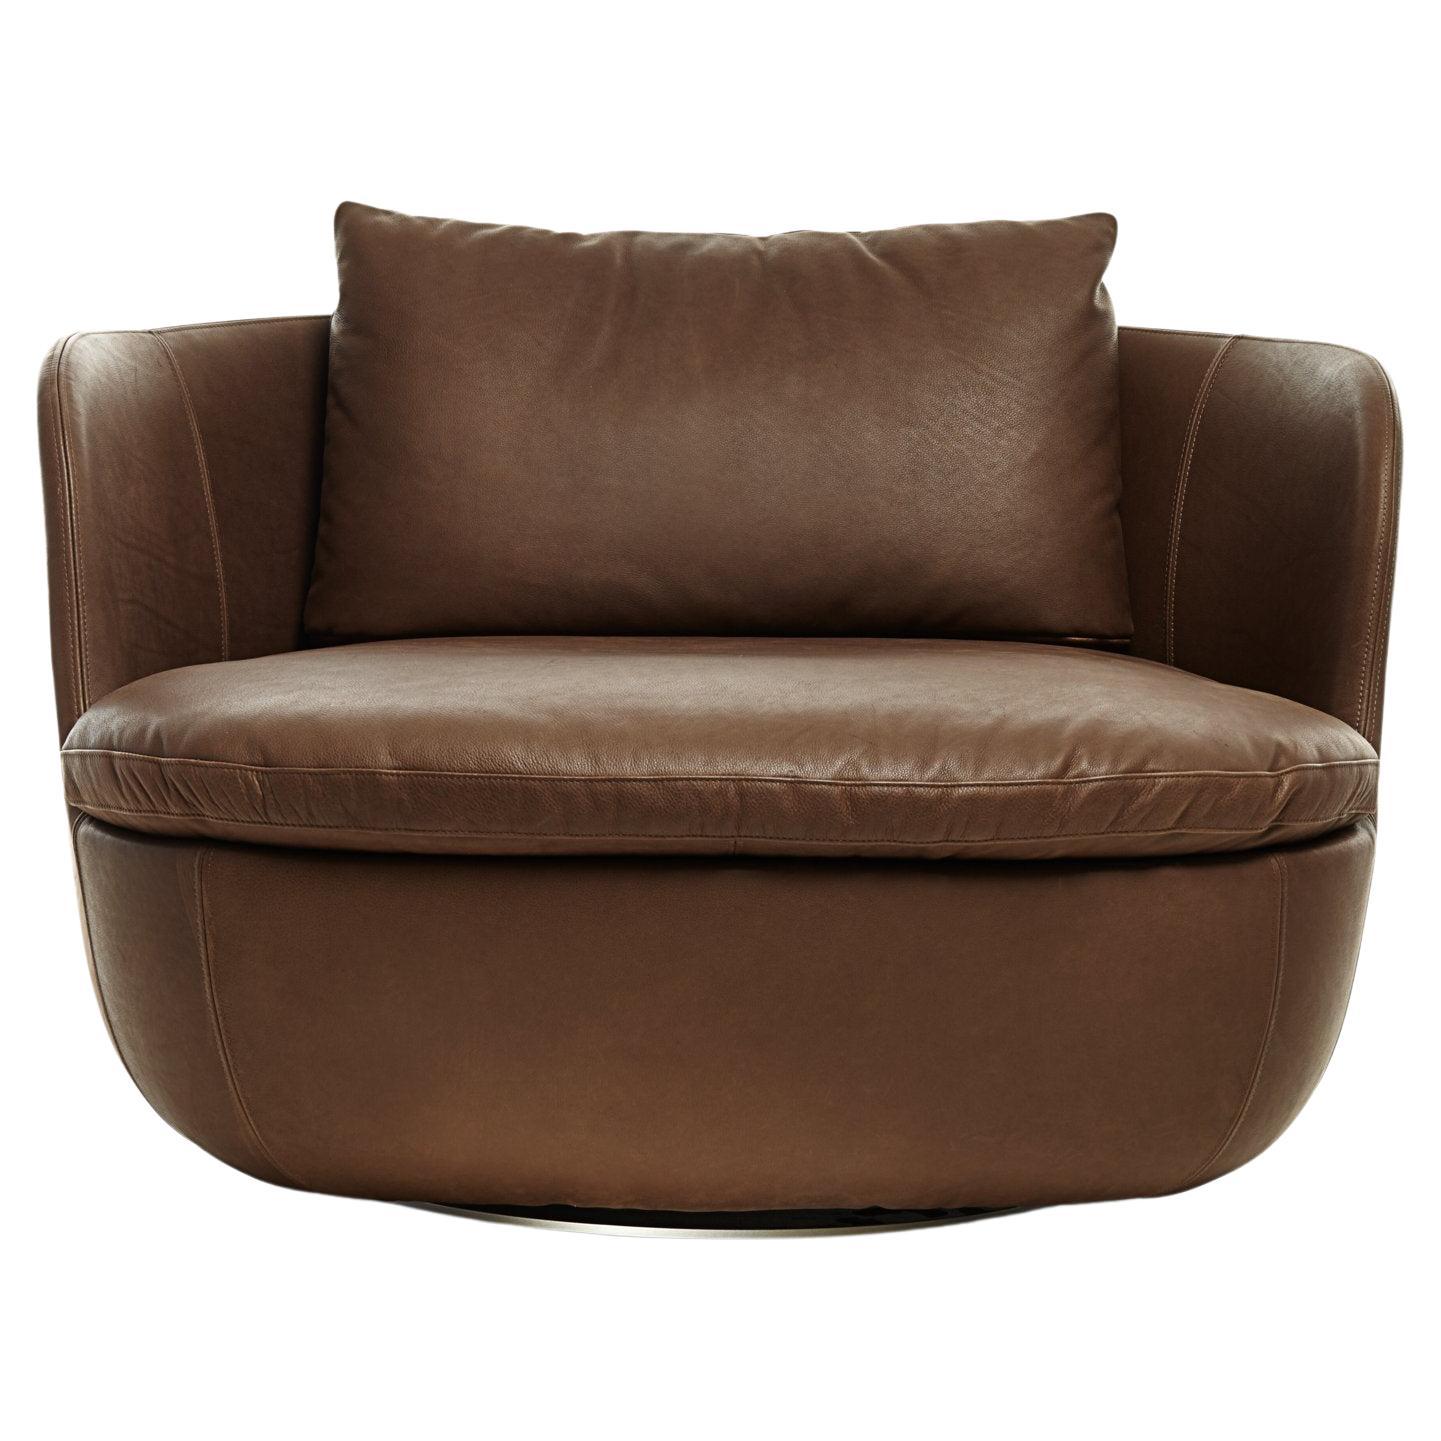 Moooi Bart Swivel Armchair in Foam Seat with Shade Raw Umber 20292 Upholstery For Sale